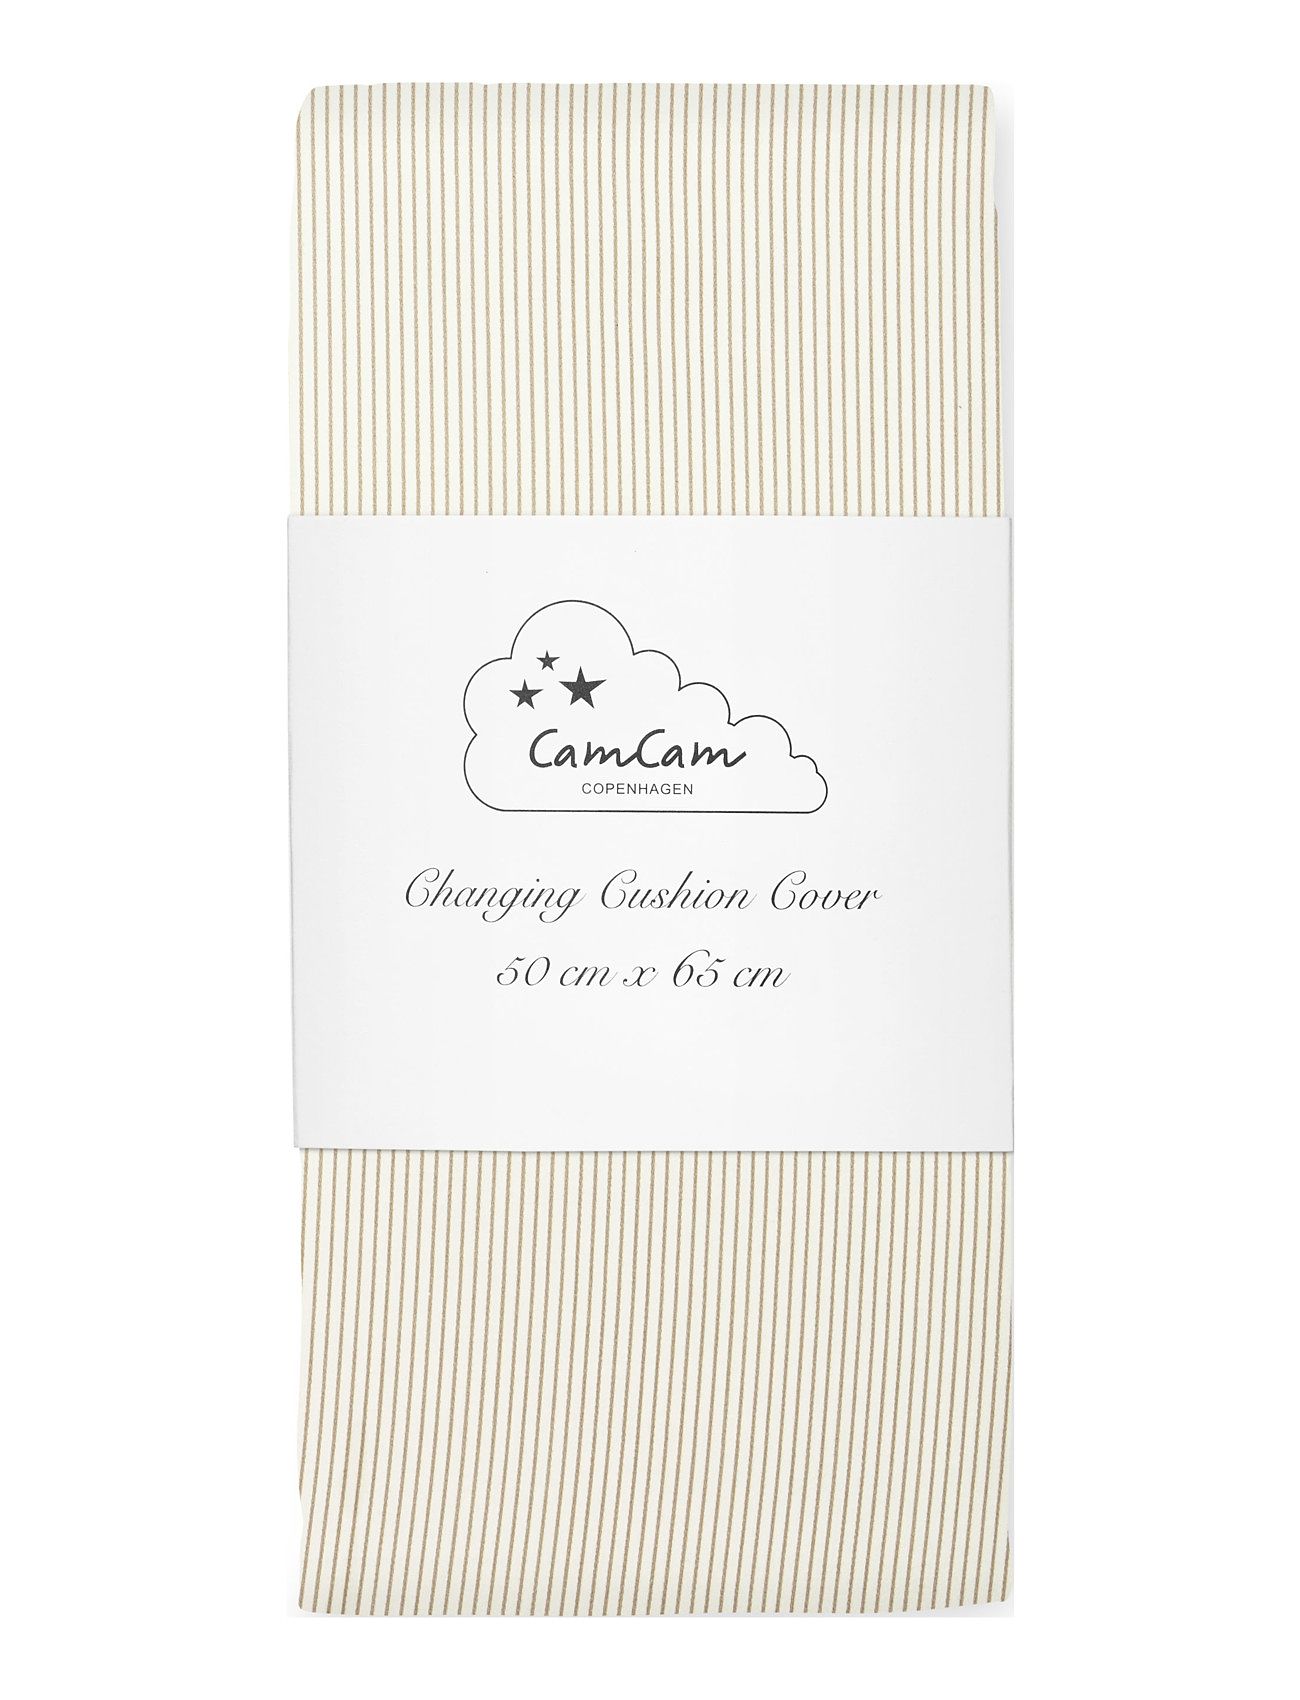 Changing Cushion Cover Baby & Maternity Care & Hygiene Changing Mats & Pads Changing Pads Covers Cream Cam Cam Copenhagen